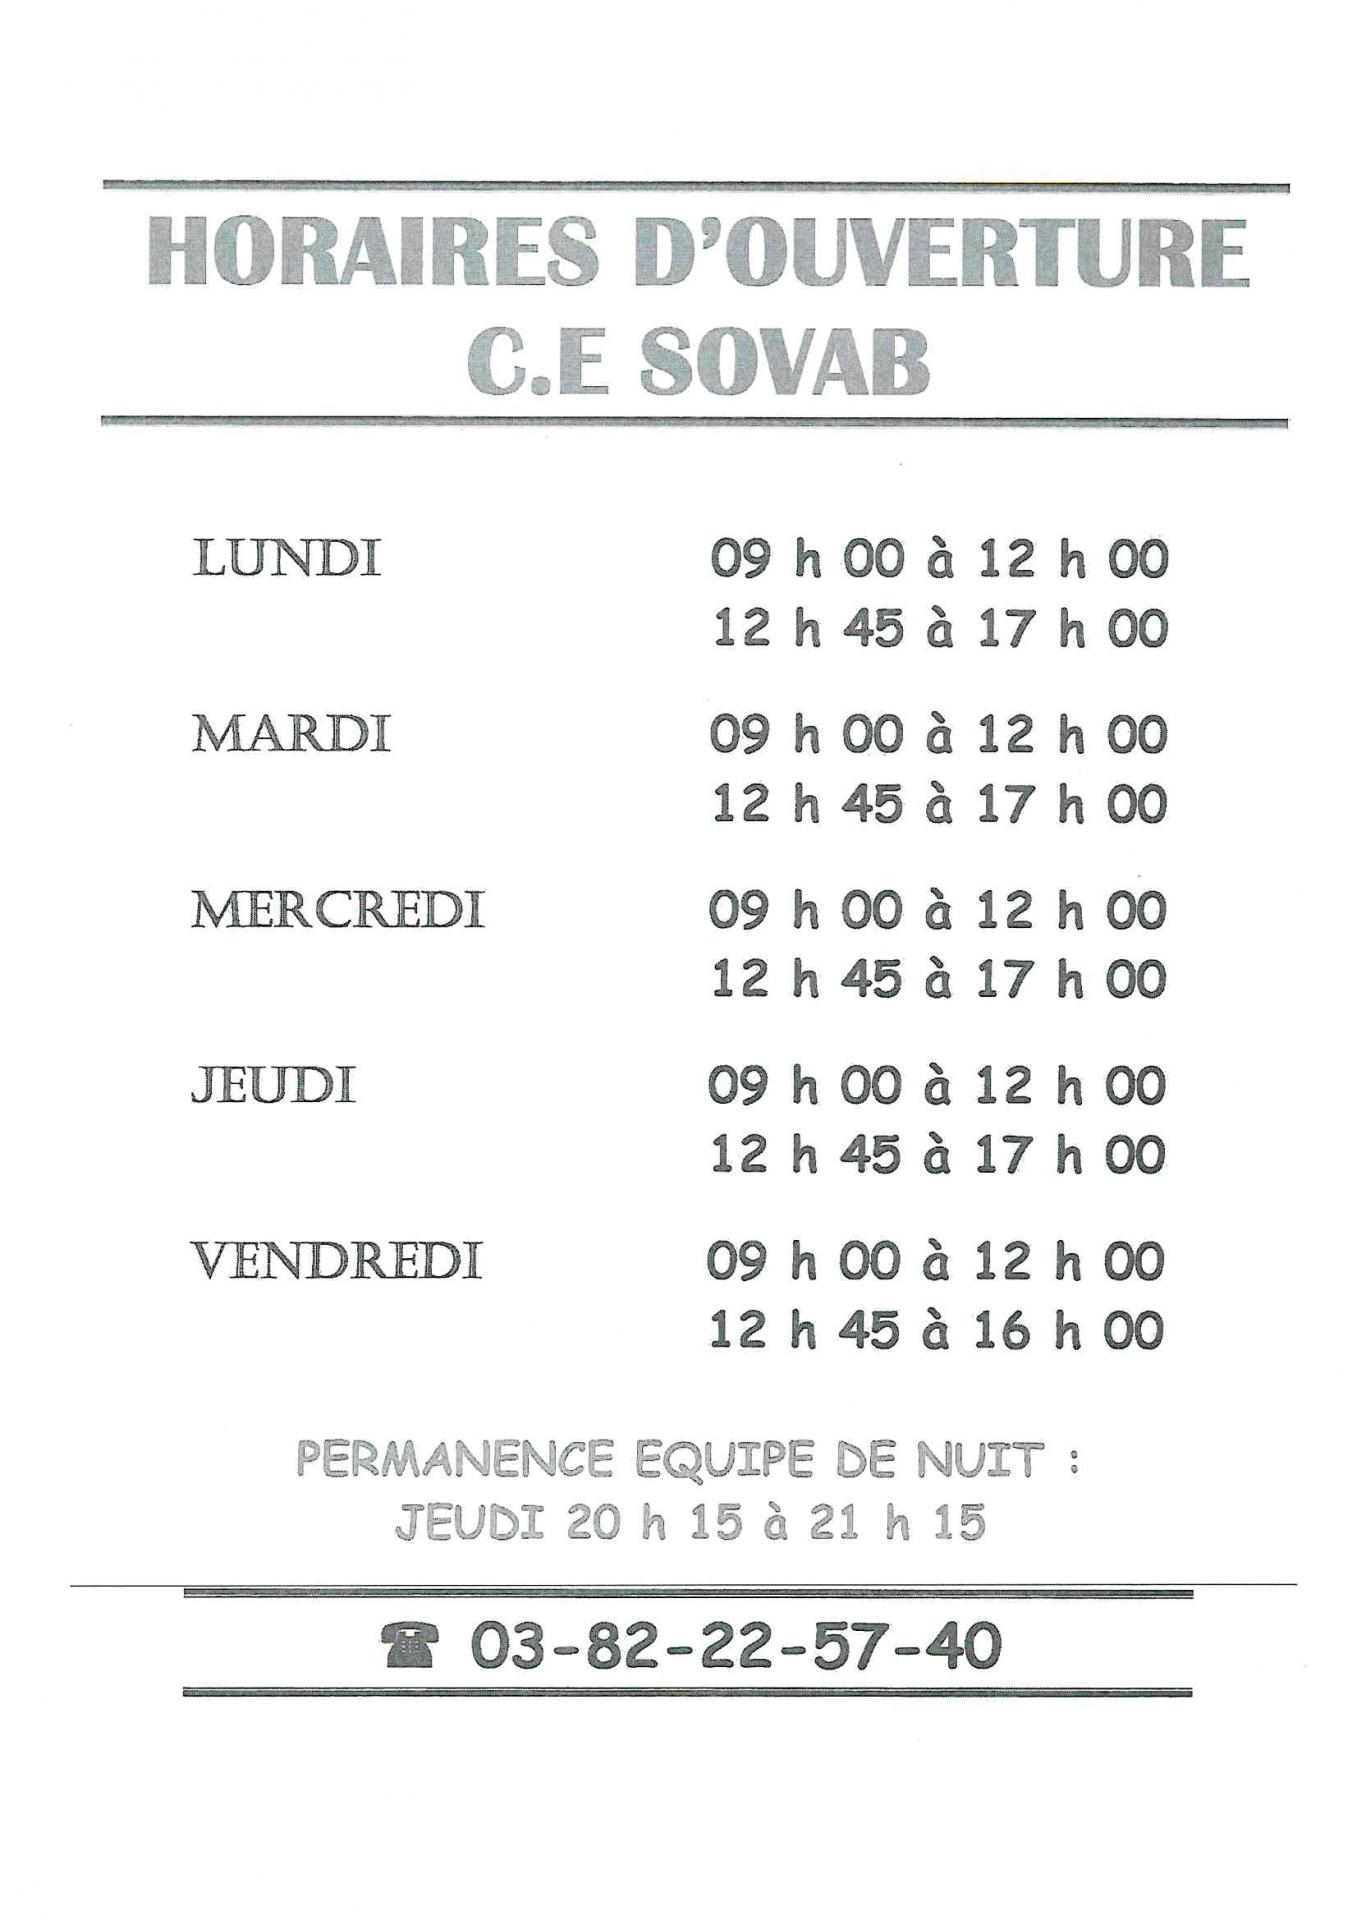 Horaire ce